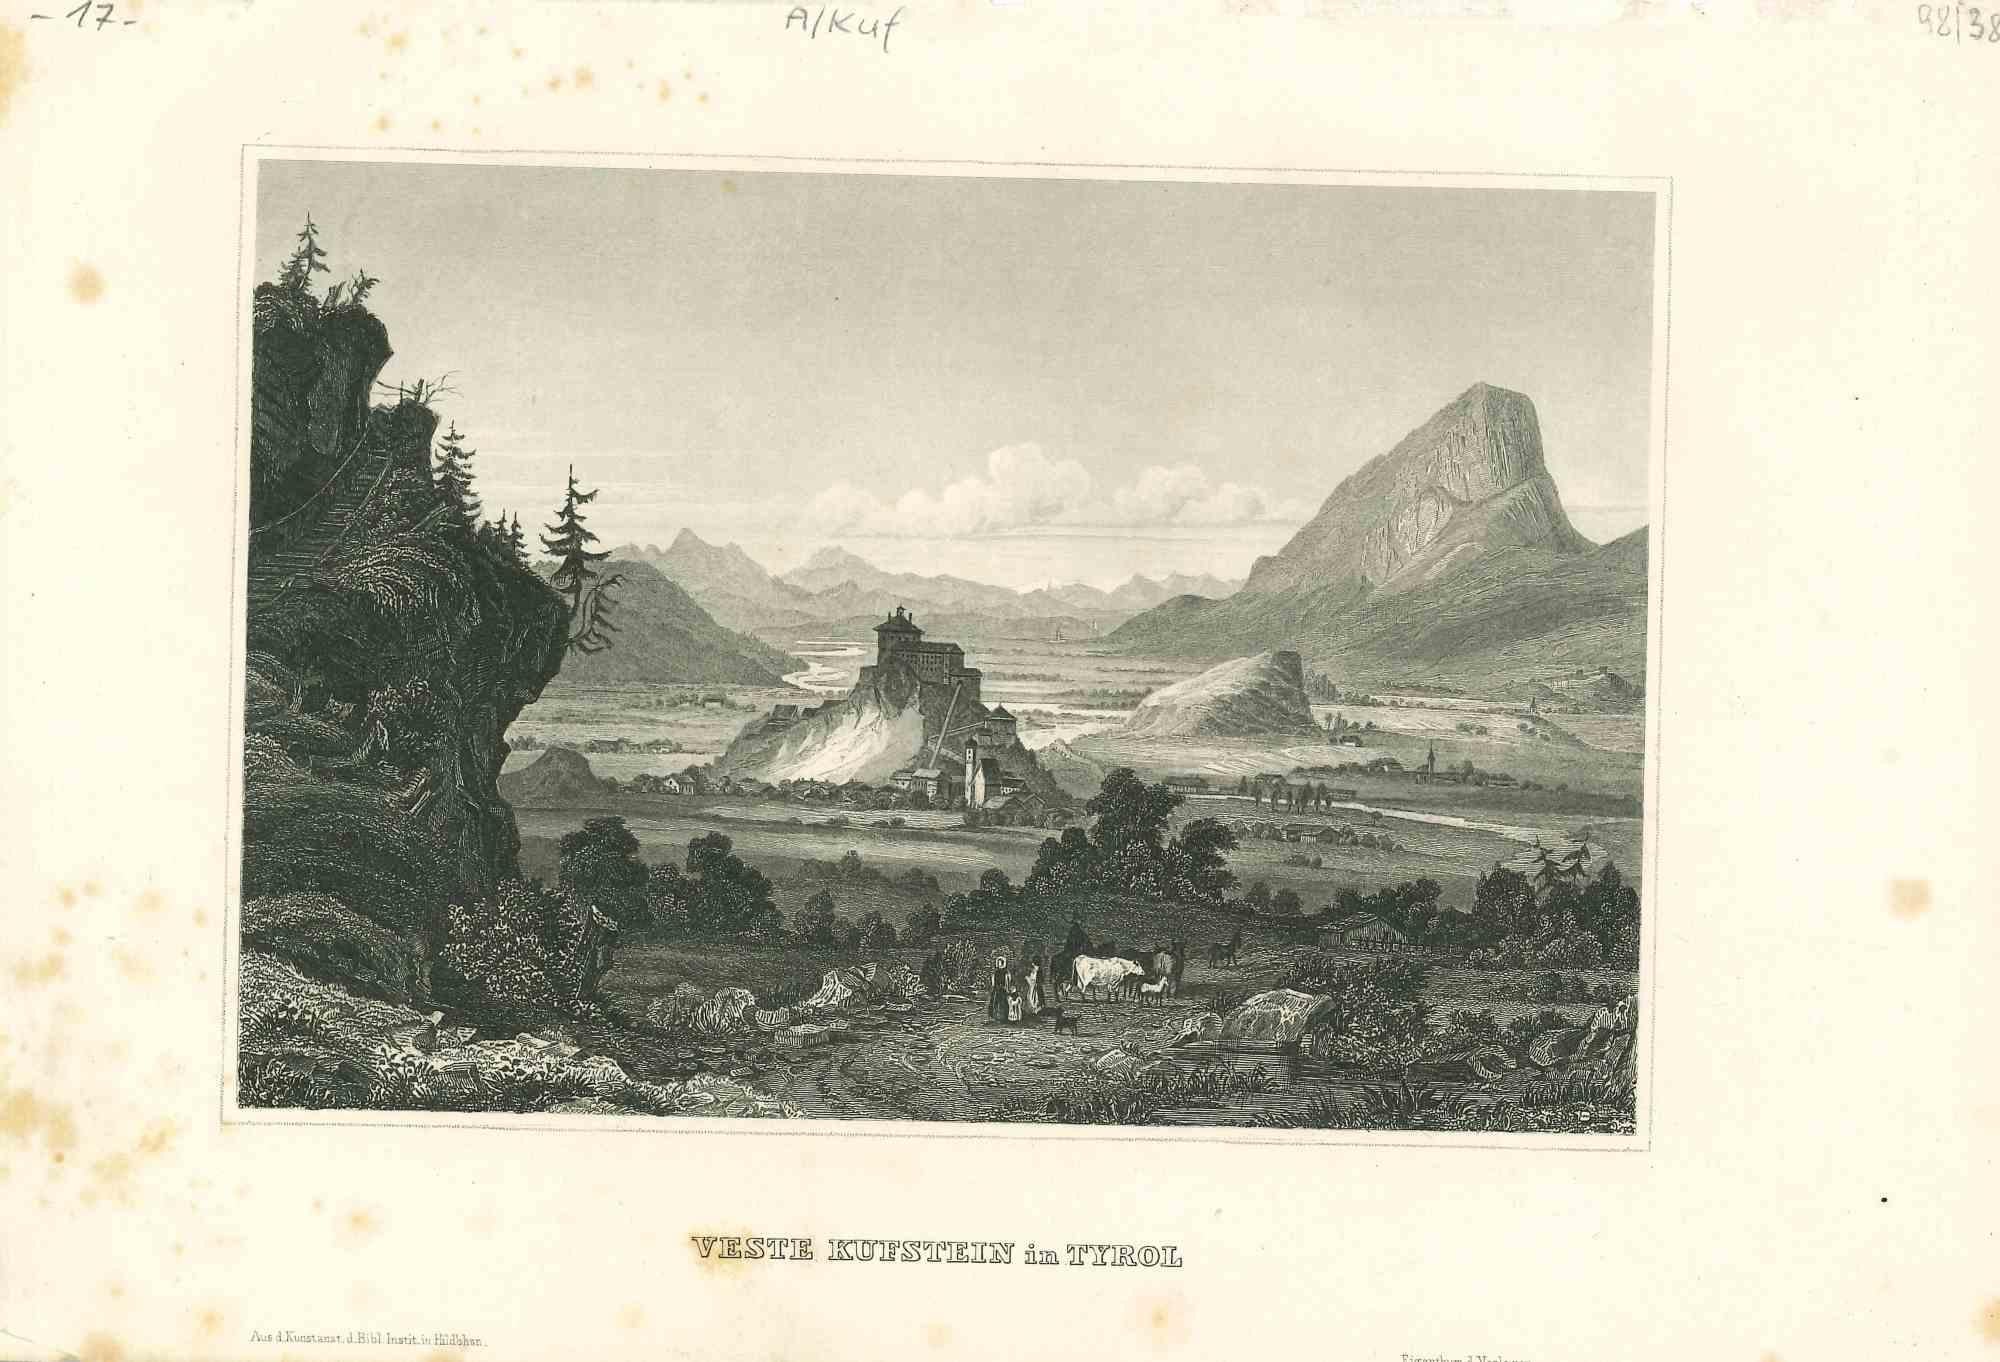 Unknown Landscape Print - Ancient View of Veste Kufstein - Original Lithograph on Paper - Mid-19th Century